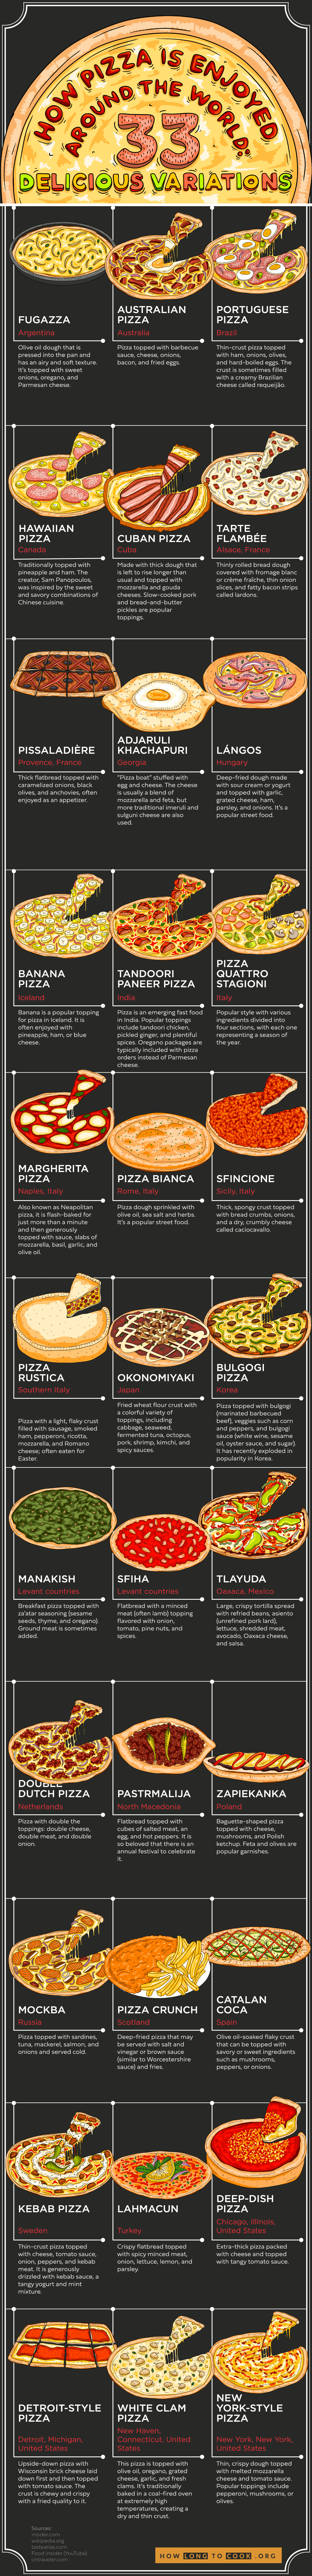 How Pizza is Enjoyed Around the World: 33 Delicious Variations